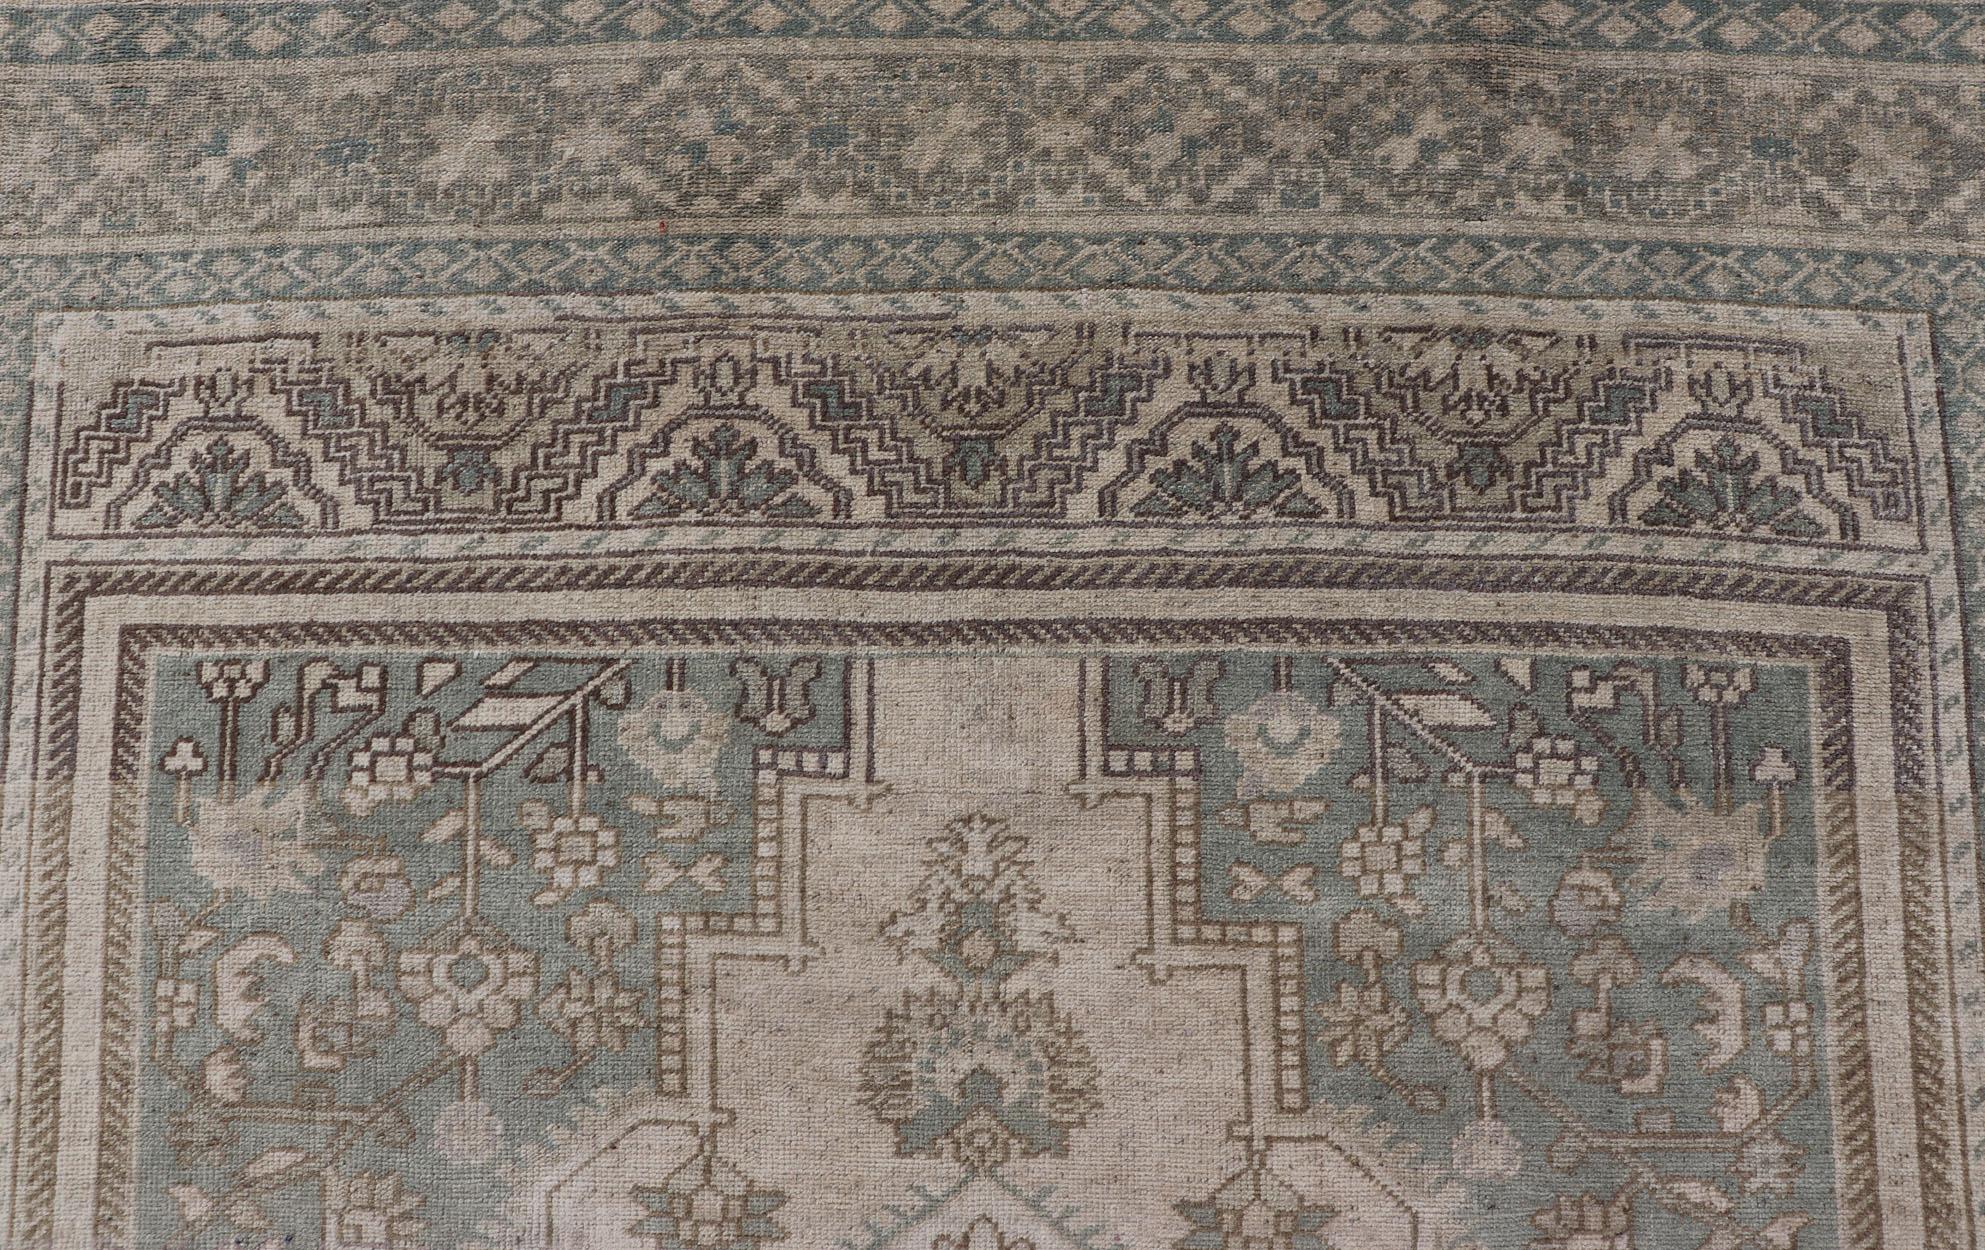 Turkish Oushak Vintage Medallion rug in Light Blue-Green, Tan, Taupe, and Cream. Keivan Woven Arts. rug EN-179303, country of origin / type: Turkey / Oushak, circa 1940

This beautiful vintage Oushak rug from 1940s Turkey features a medallion